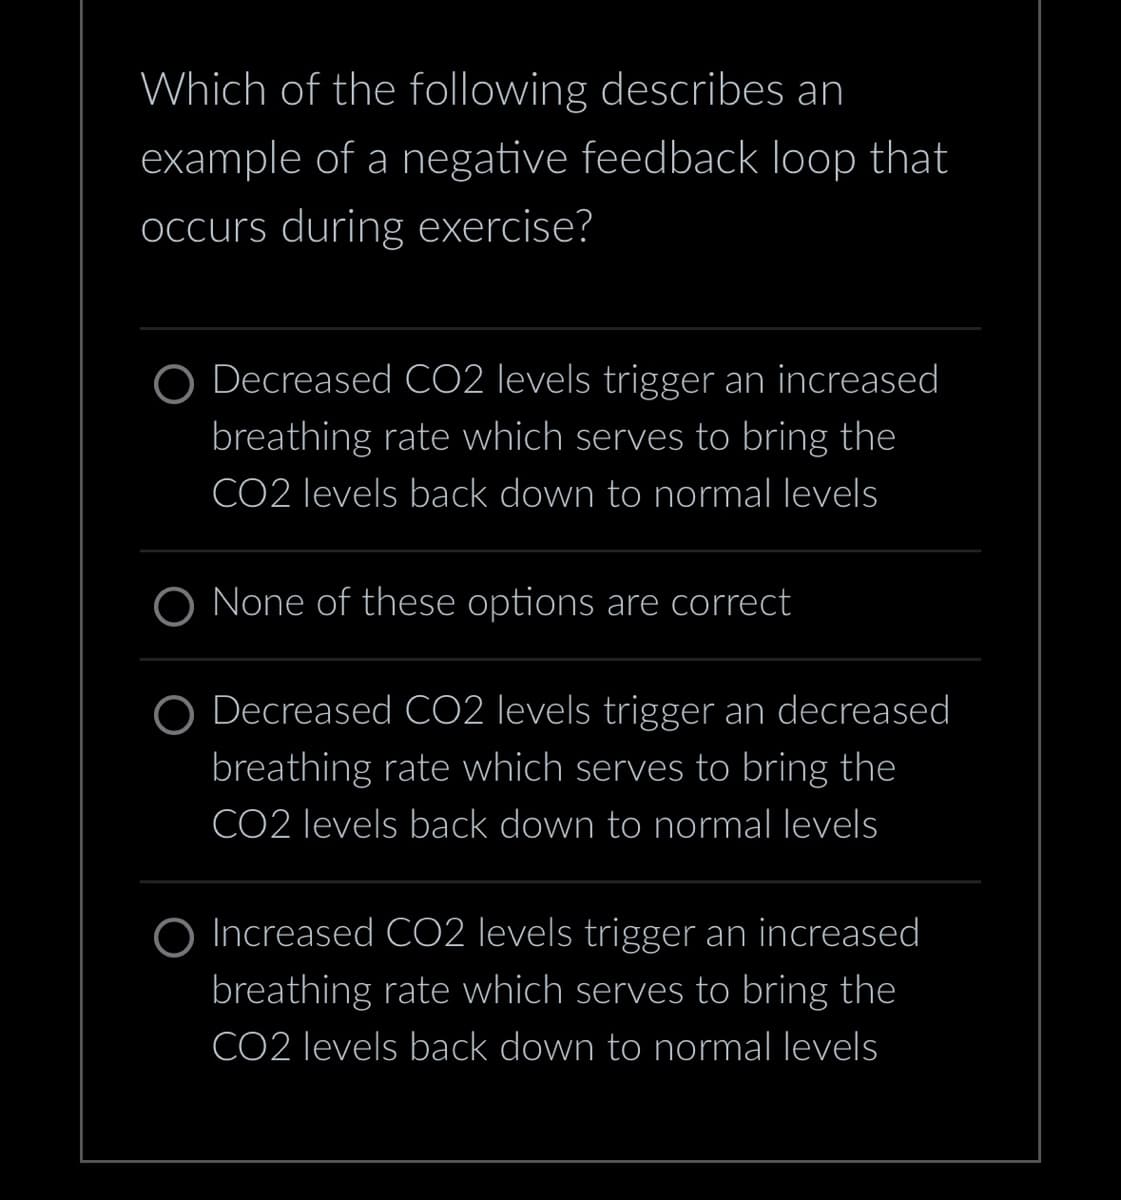 Which of the following describes an
example of a negative feedback loop that
occurs during exercise?
Decreased CO2 levels trigger an increased
breathing rate which serves to bring the
CO2 levels back down to normal levels
None of these options are correct
Decreased CO2 levels trigger an decreased
breathing rate which serves to bring the
CO2 levels back down to normal levels
O Increased CO2 levels trigger an increased
breathing rate which serves to bring the
CO2 levels back down to normal levels